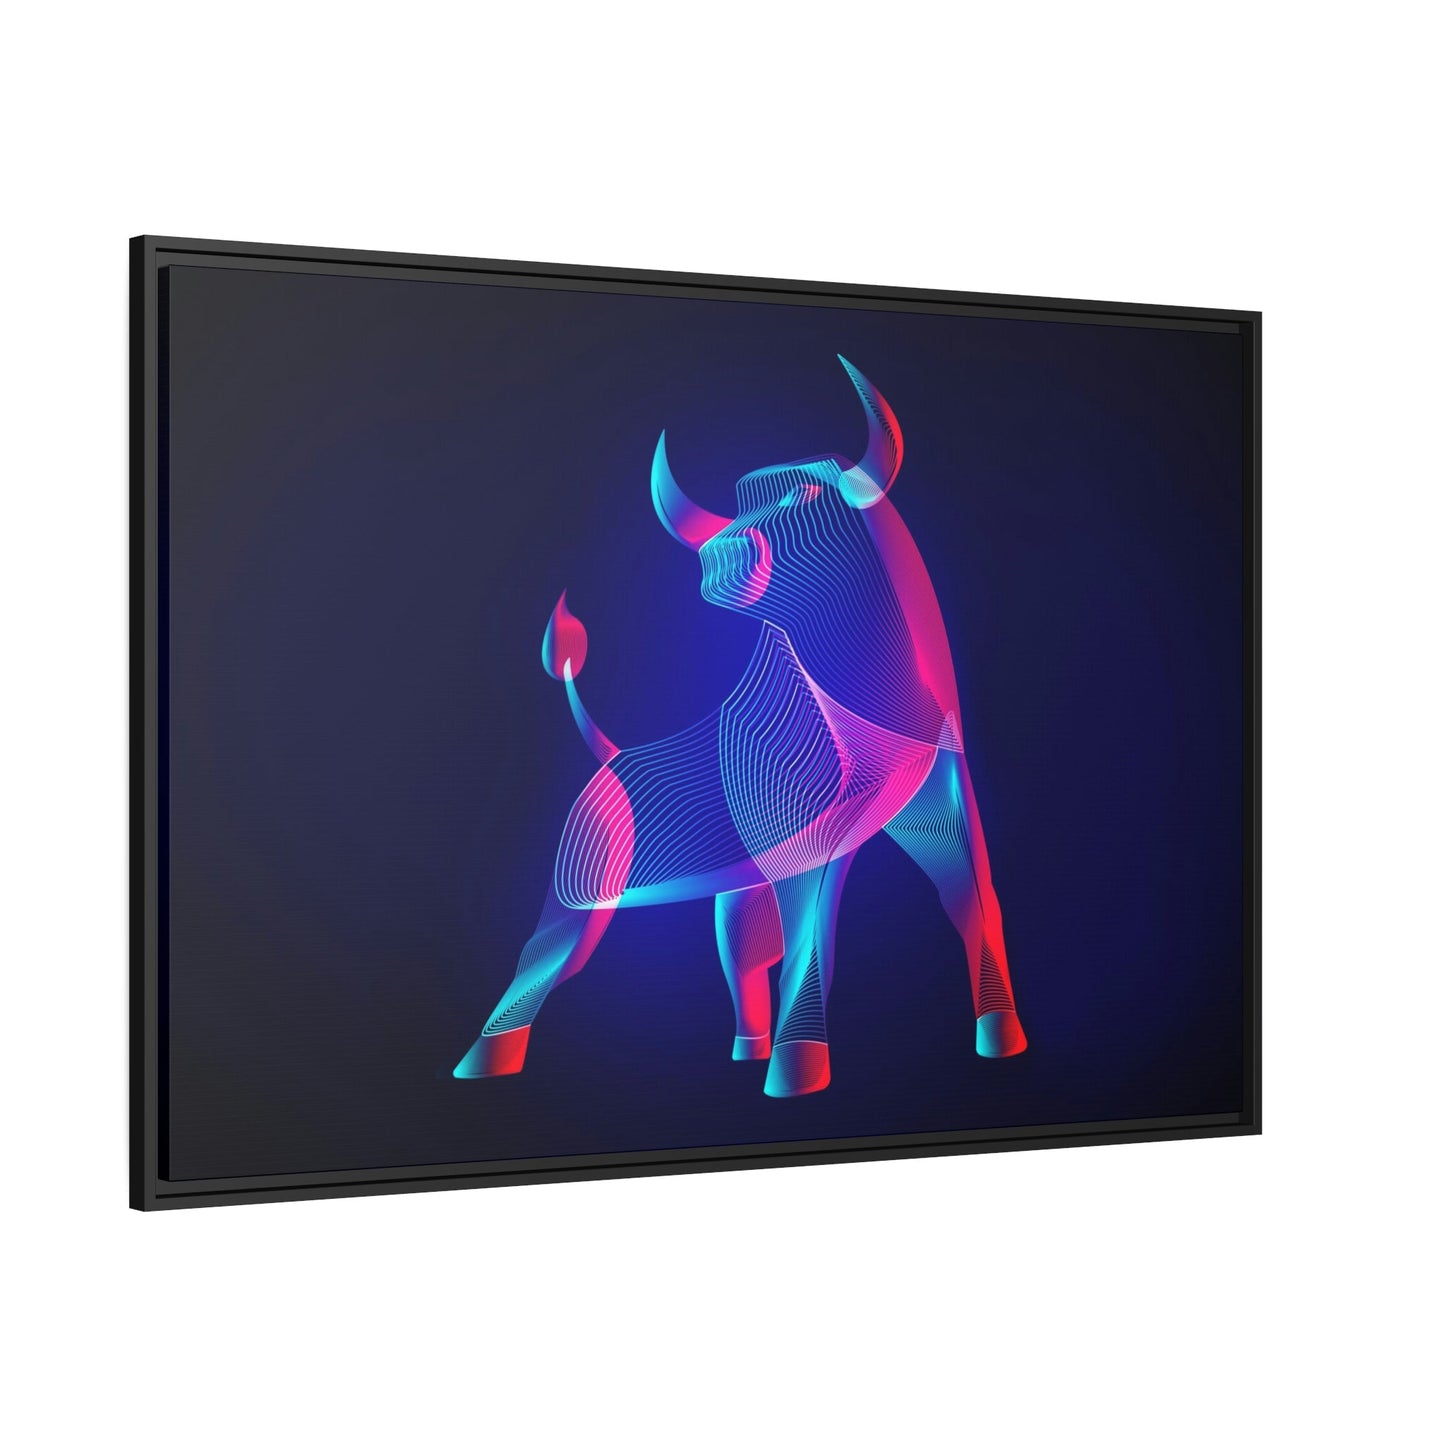 Enchanted Expressions: Premium Canvas Prints for Exquisite Neon-themed Wall Decor